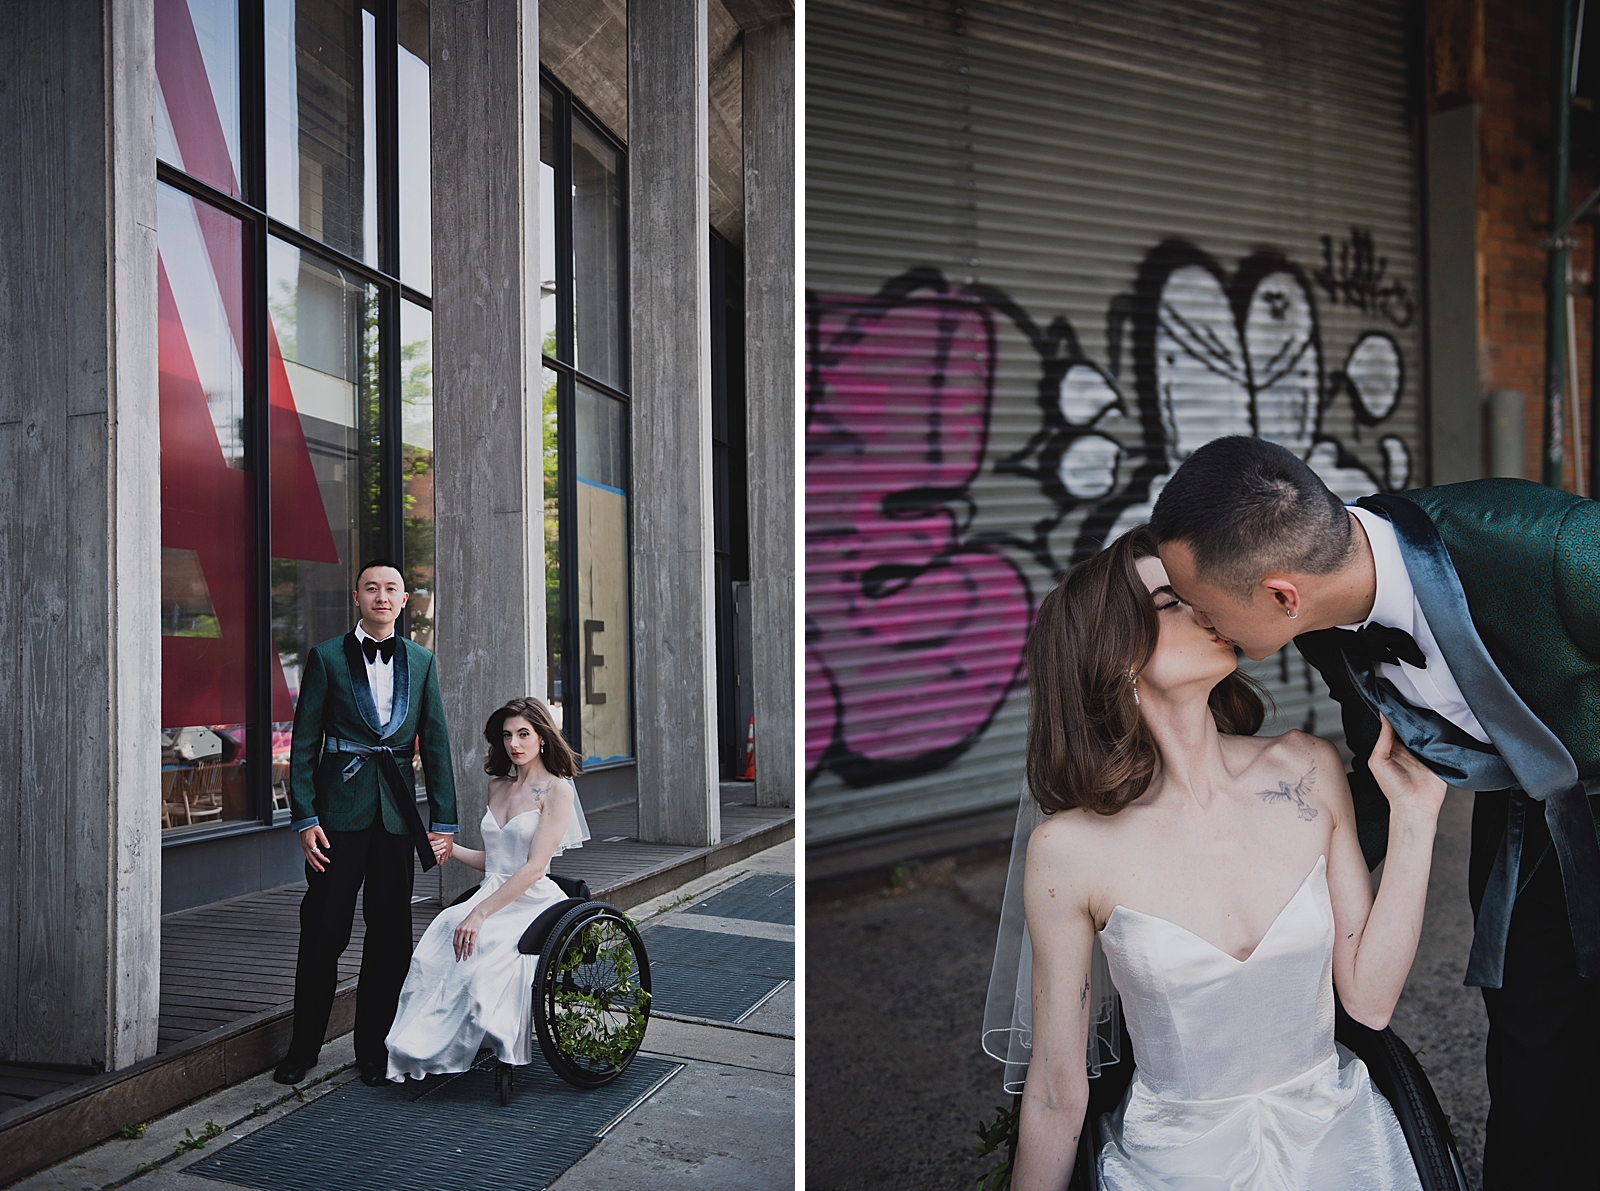 Left photo: Full body shot of the bride and groom holding hands as they pose for the camera. 
Right photo: Shot of the bride and groom sharing a kiss in front of a graffiti wall. 